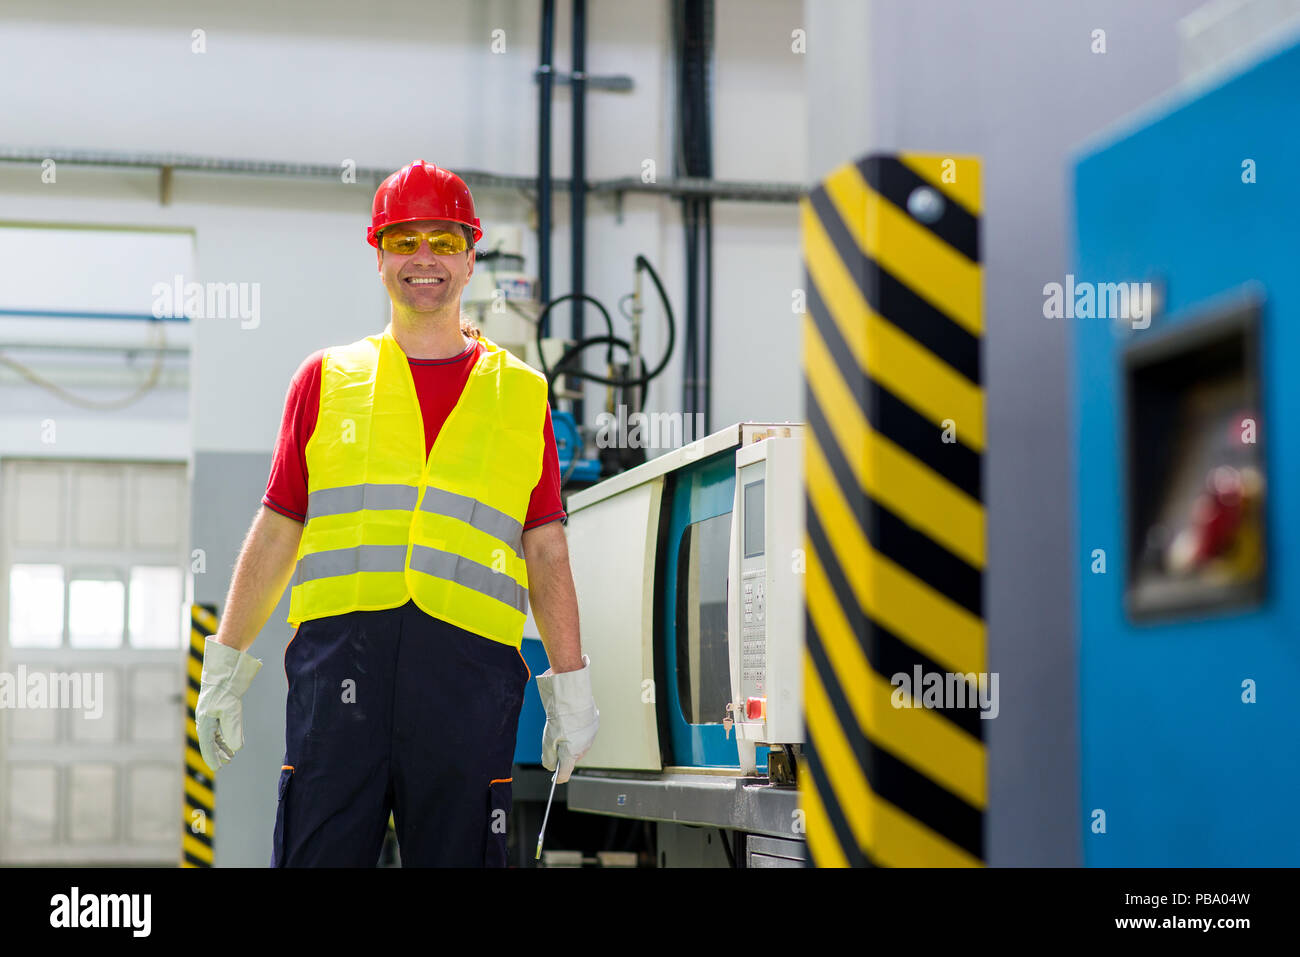 Factory worker smiling and looking at a camera standing beside a factory machine. Worker wearing safety clothing. Stock Photo